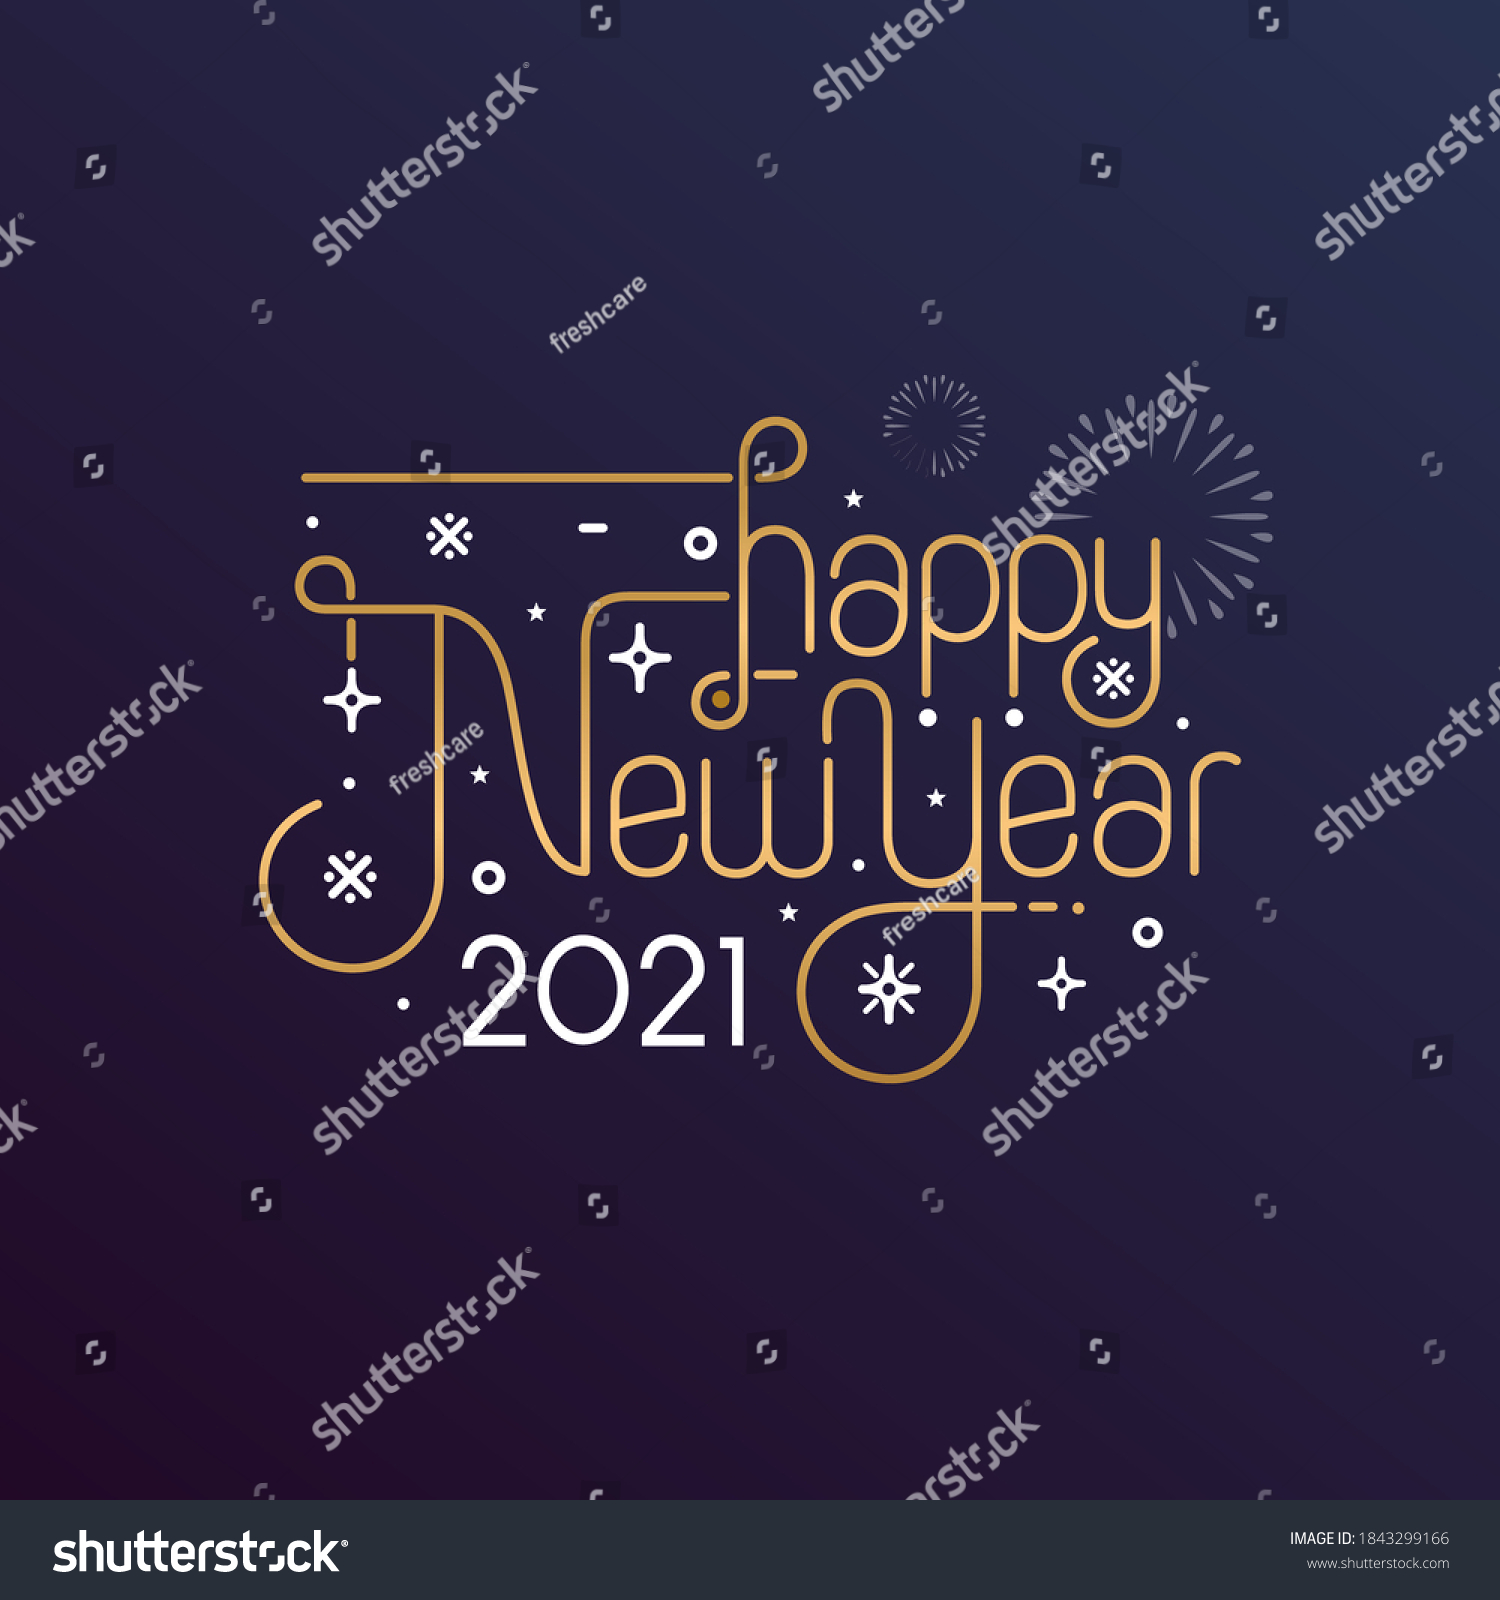 Happy New Year 2021 vector illustration for banner, flyer and greeting card